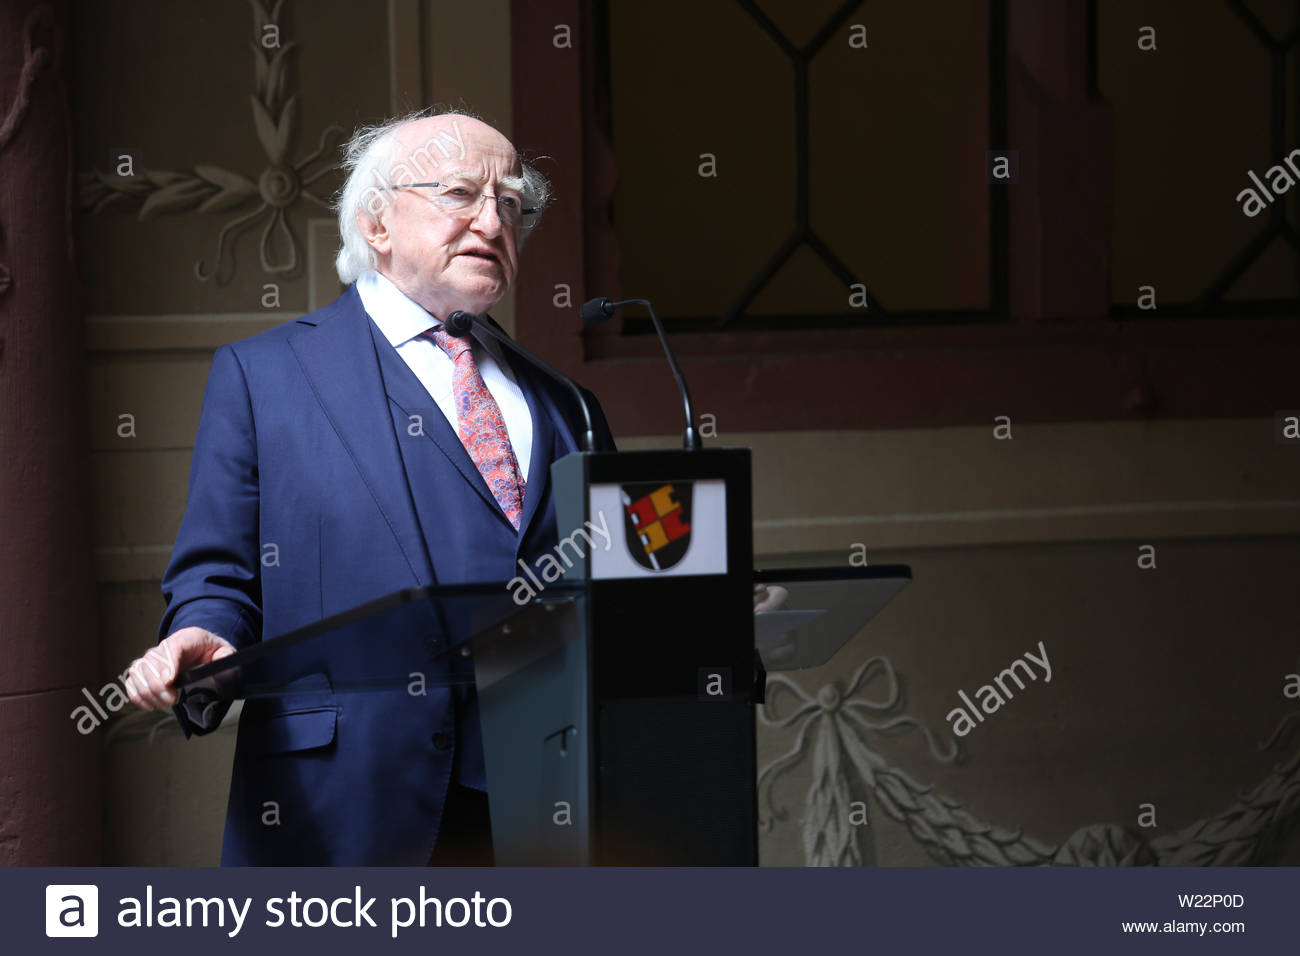 Würzburg, Germany. 5th July 2019. Irish president Michael D Higgins has visitedi Würzburg in Bavaria today on the last leg of his diplomatic trip to Germany.  Credit: Clearpix/Alamy Live News Stock Photo